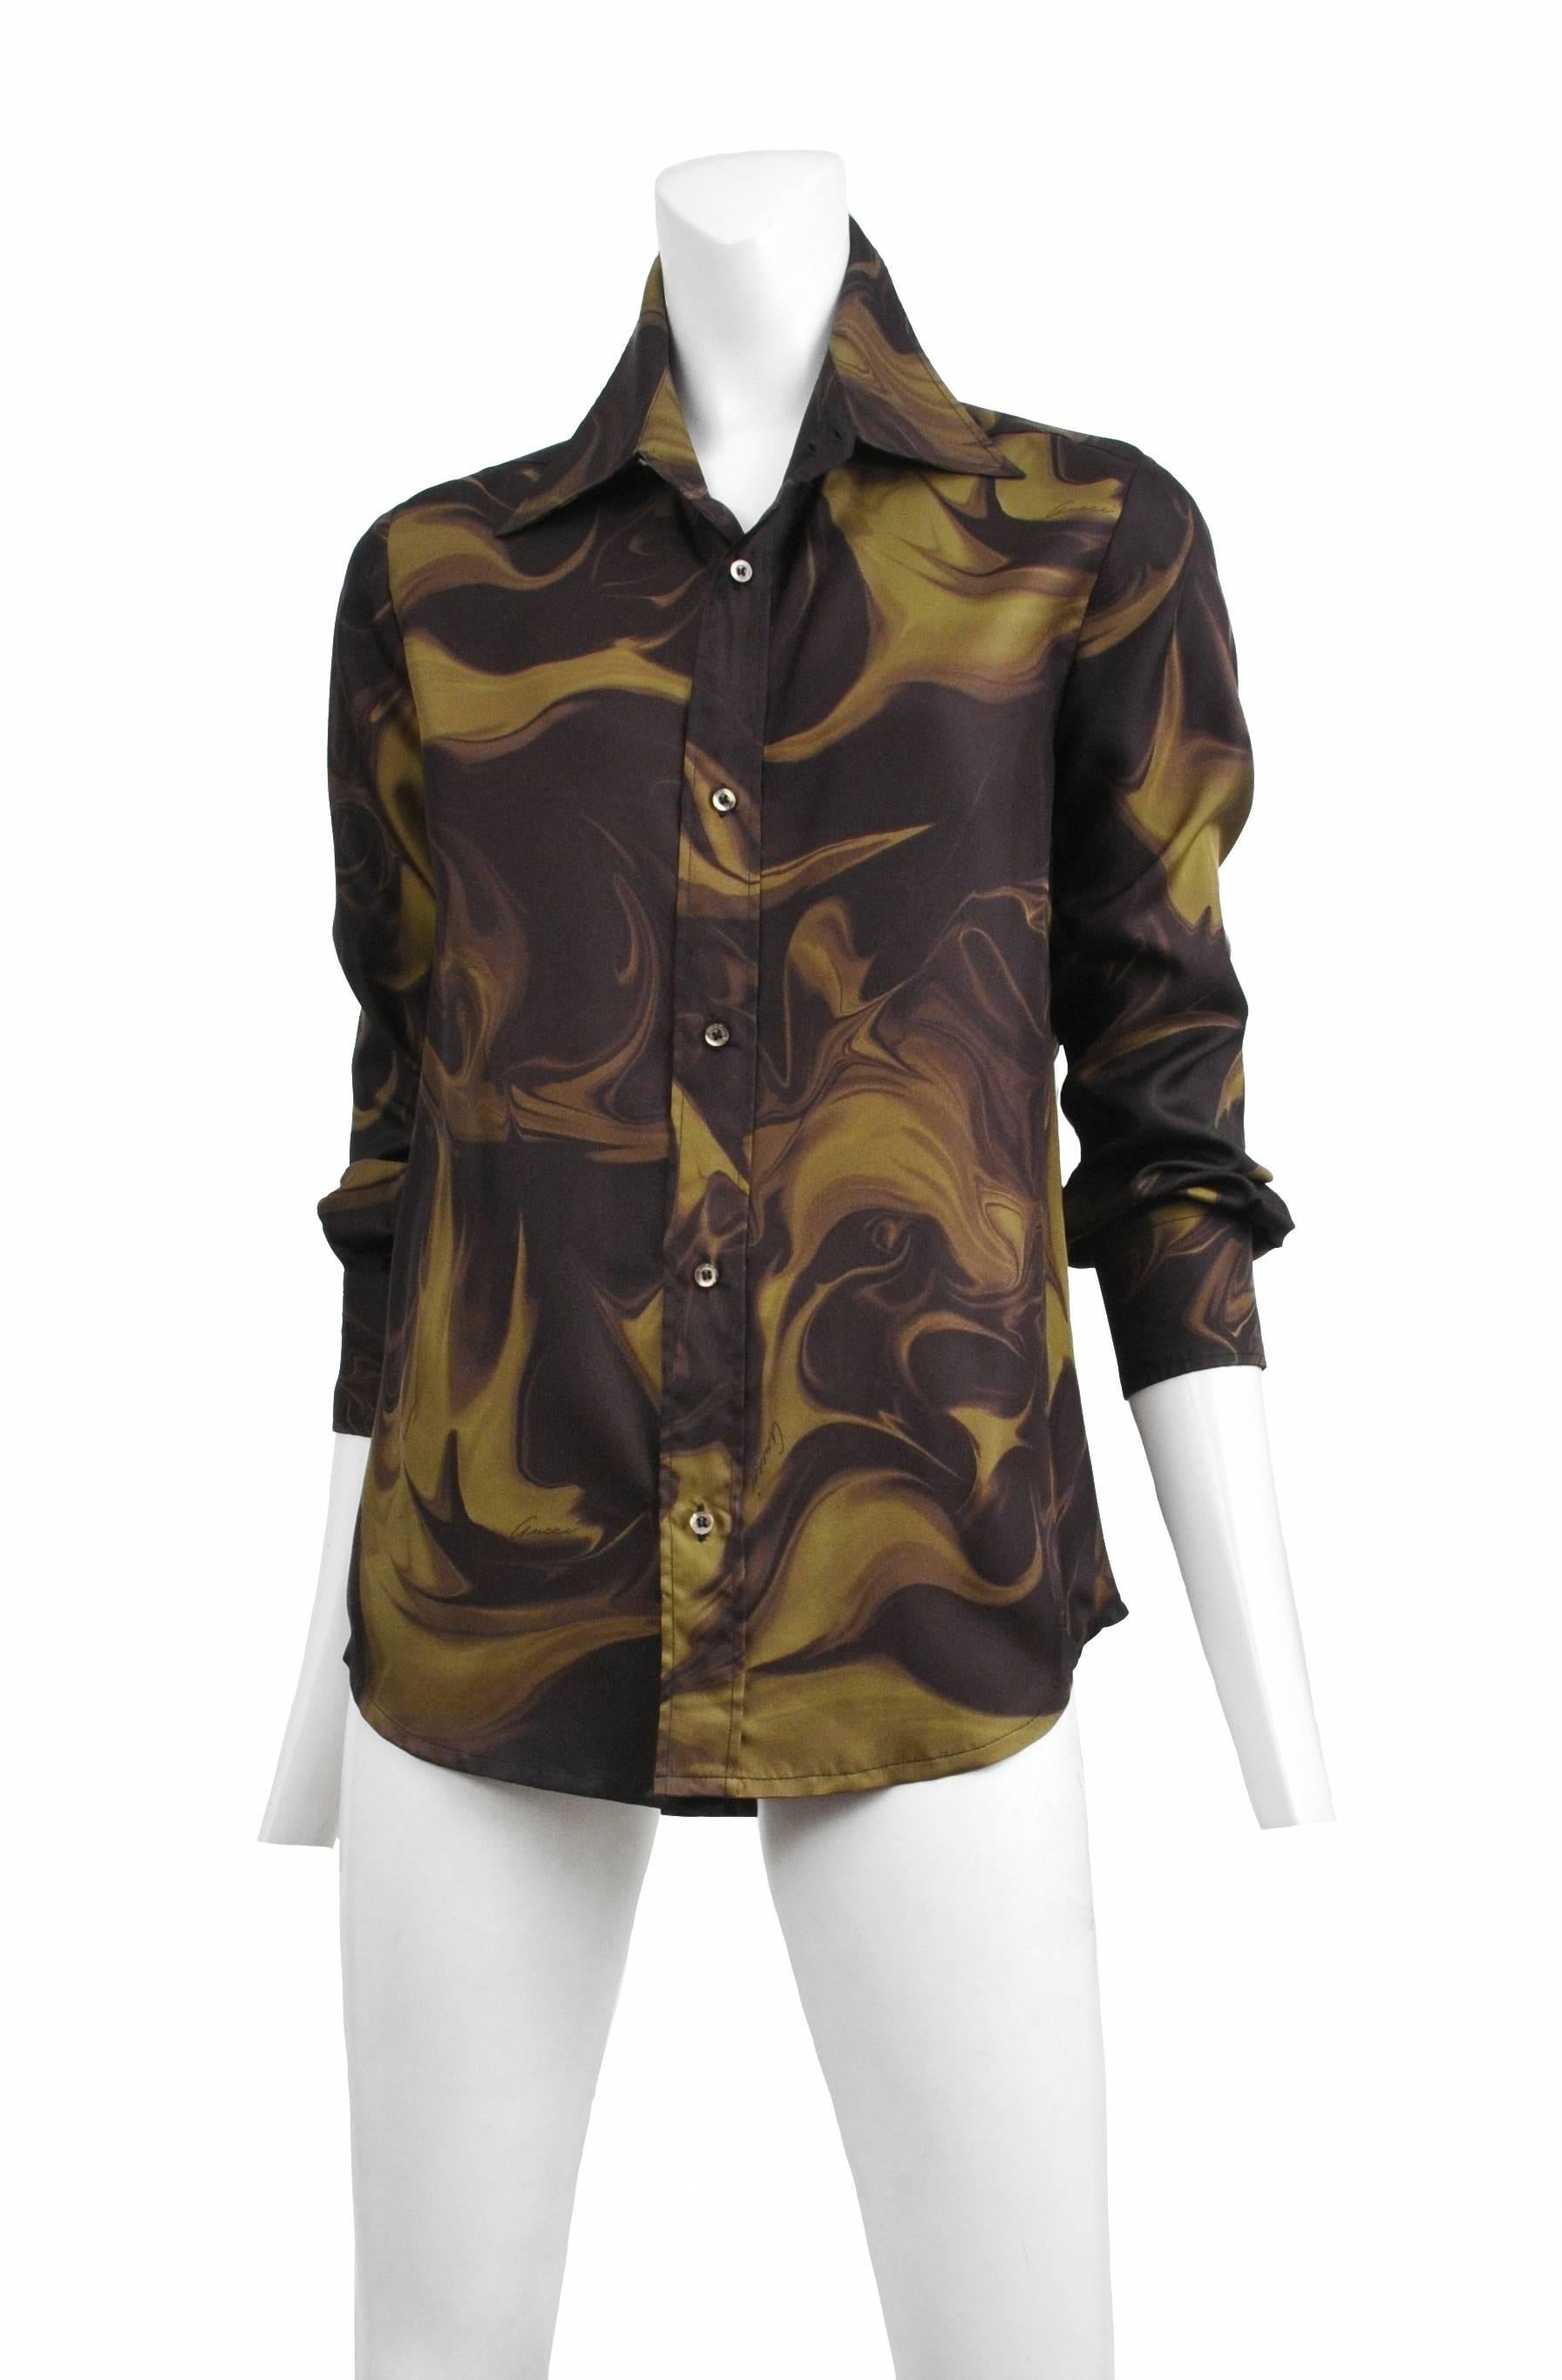 Vintage Tom Ford for Gucci silk marble print button up shirt. Circa 2000.
Please inquire for additional images.